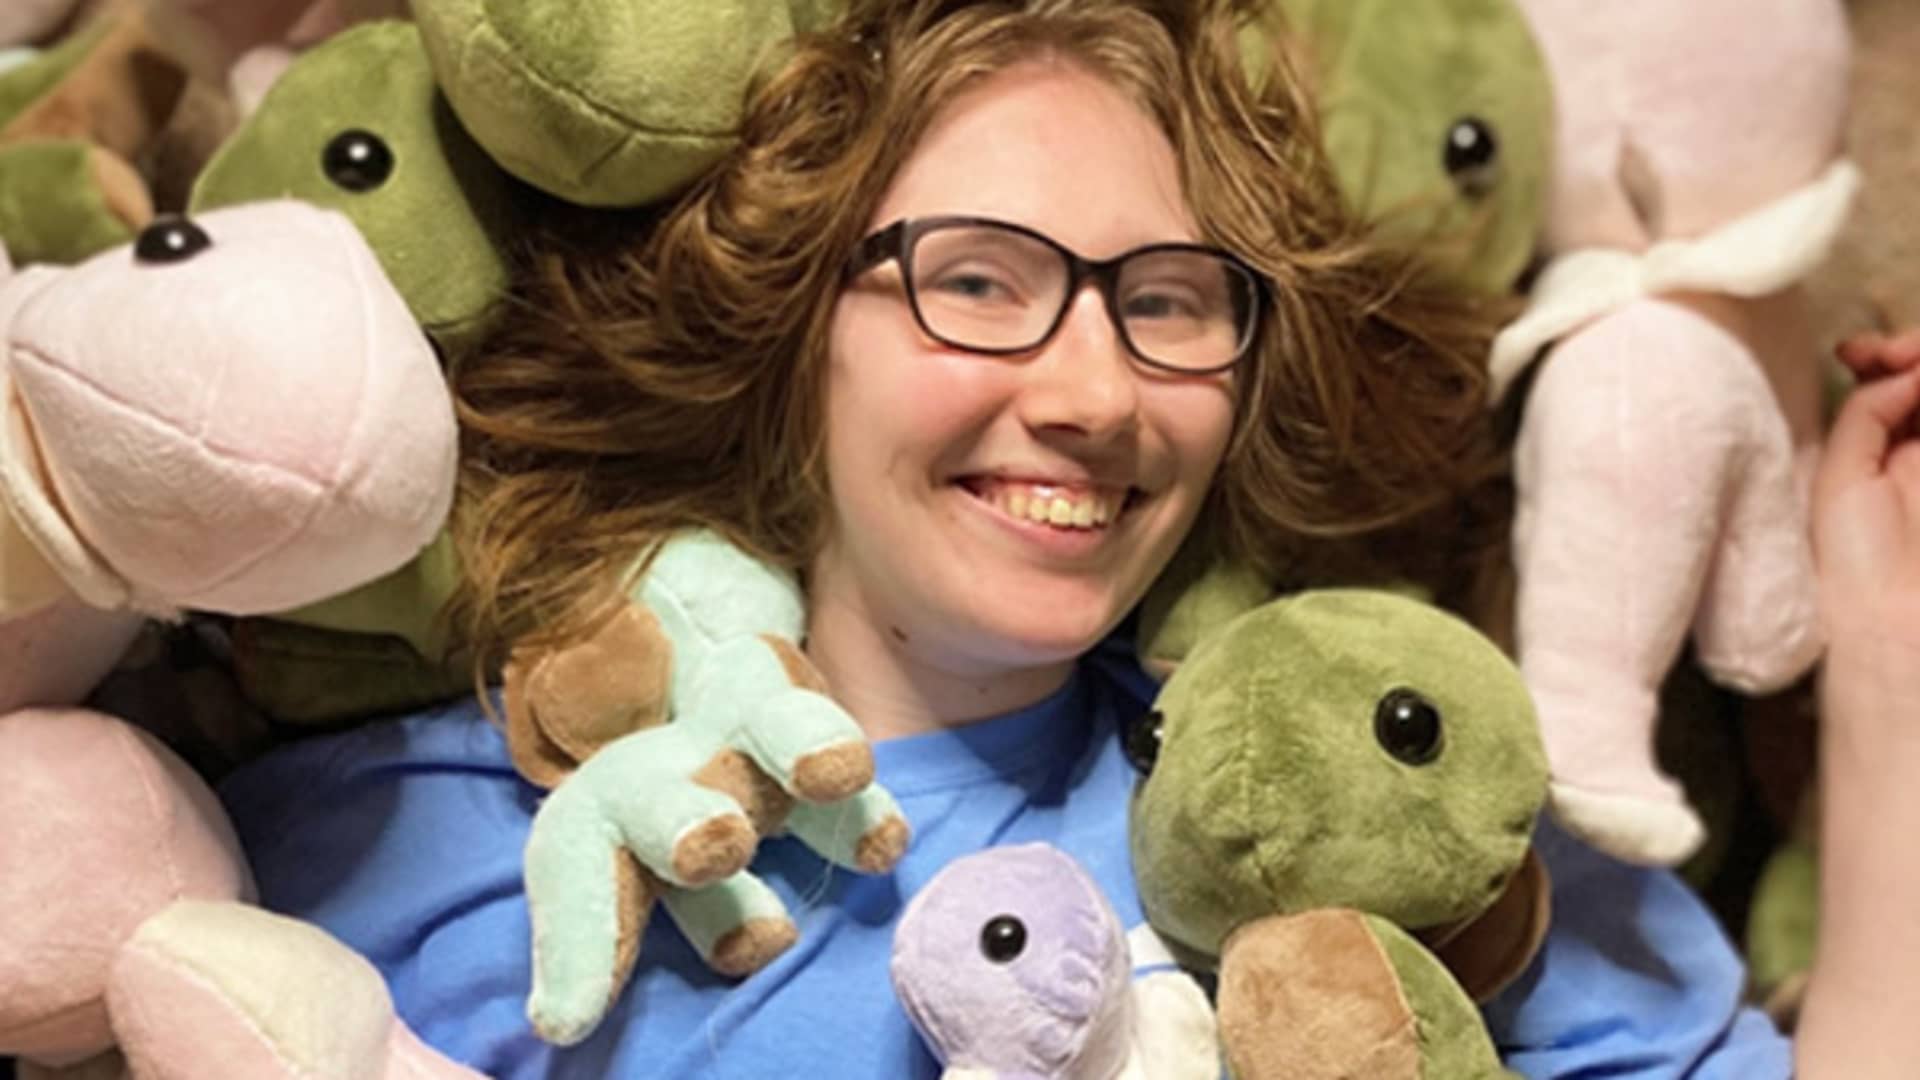 Emily Foster with her stuffed animals.